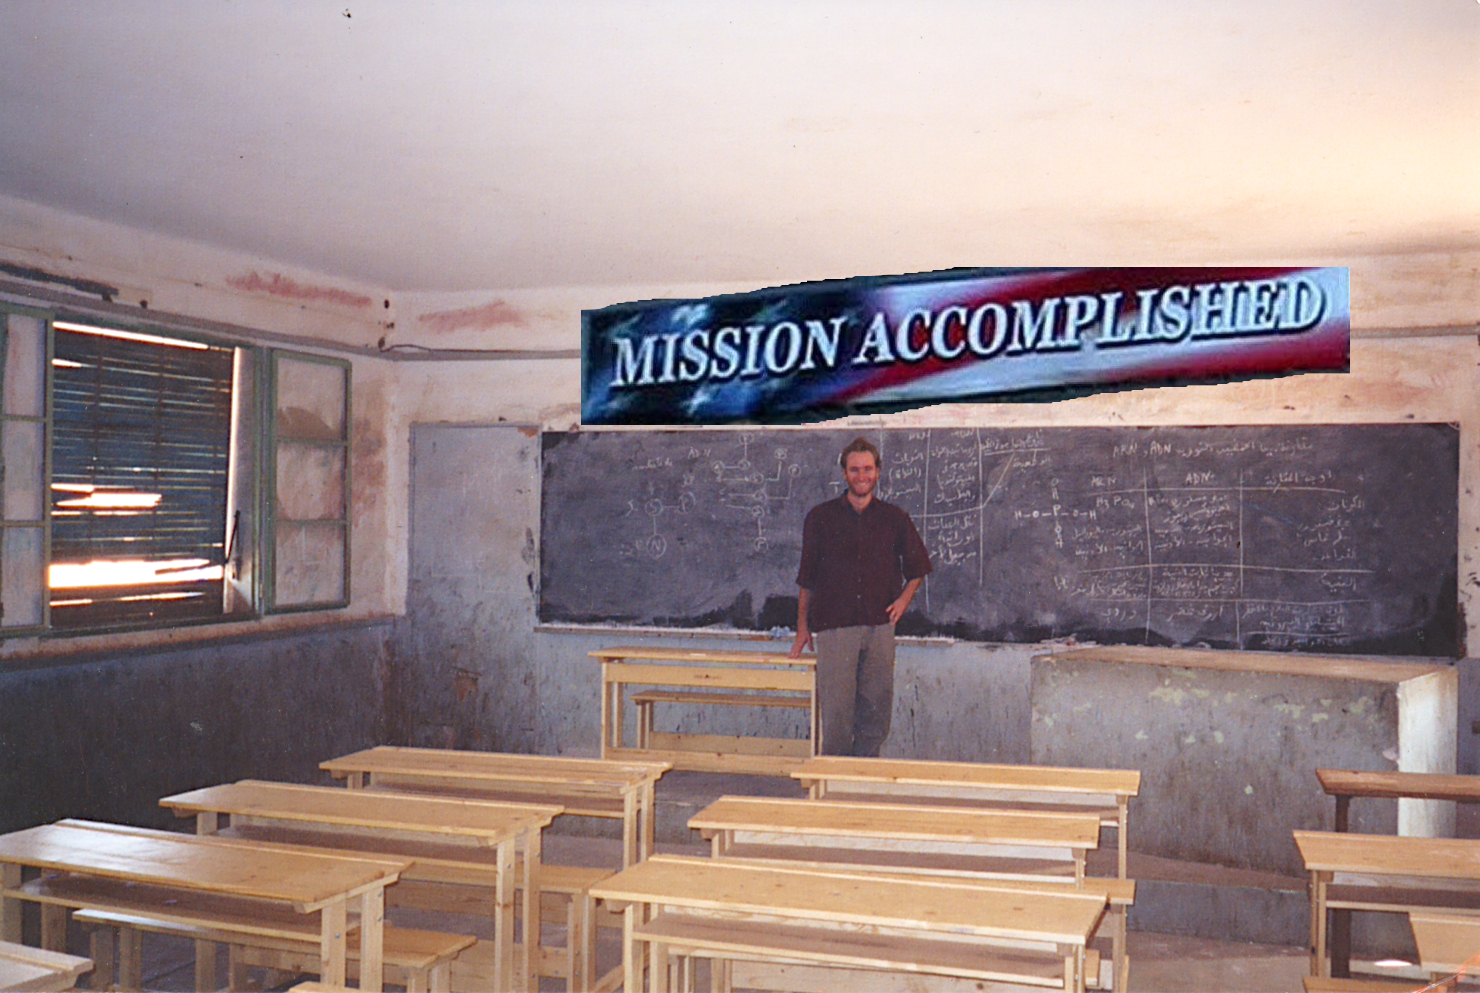 Altered photo. 'Mission Accomplished' banner from President Bush's aircraft carrier speech superimposed on original photo. John is standing at the head of a classroom facing the viewer. Behind him is a dusty chalkboard nearly the length of the wall. In front of him stand several bench-style desks, for two kids each. The walls are dirty; paint is chipping off surfaces; the shutters in the window are blocking the sunlight except where they are broken.